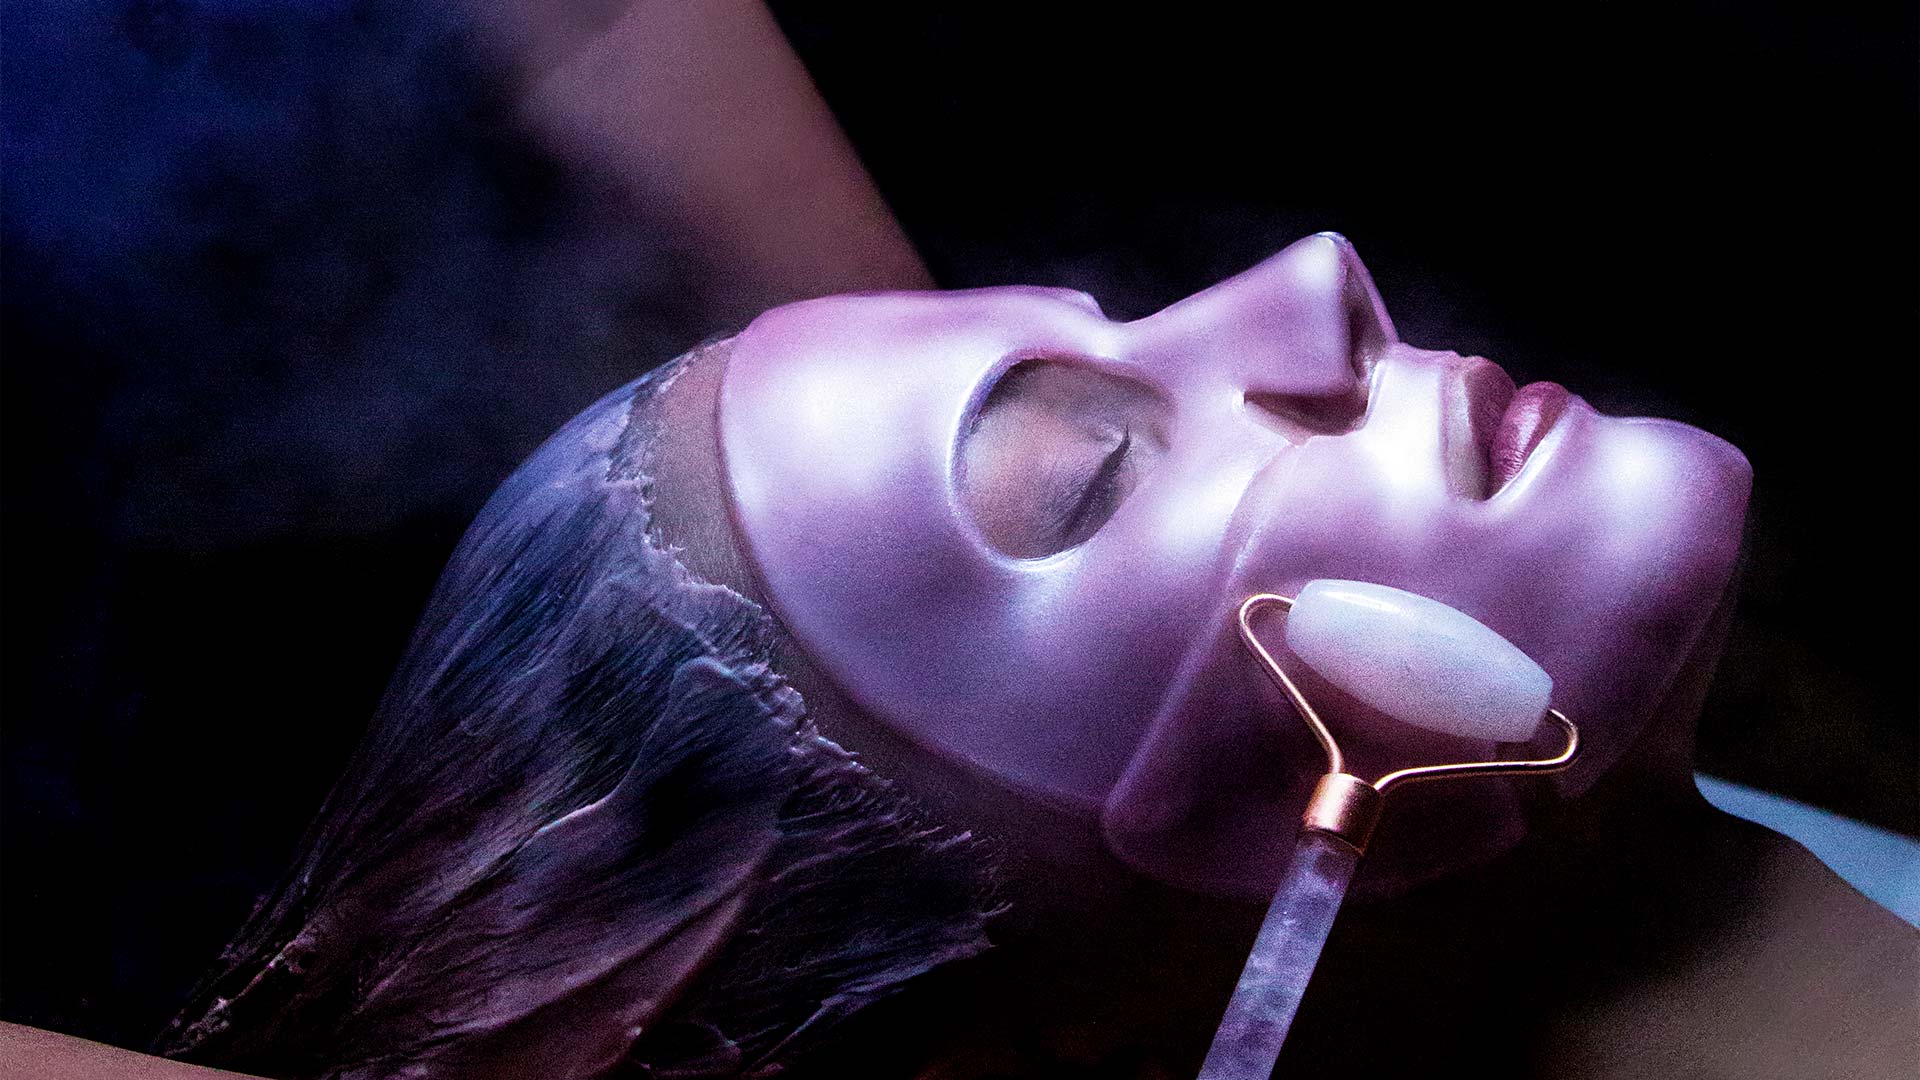 close up of a woman getting a spa treatment done. She has a pink mask on her face and a jade roller is moving across her face.